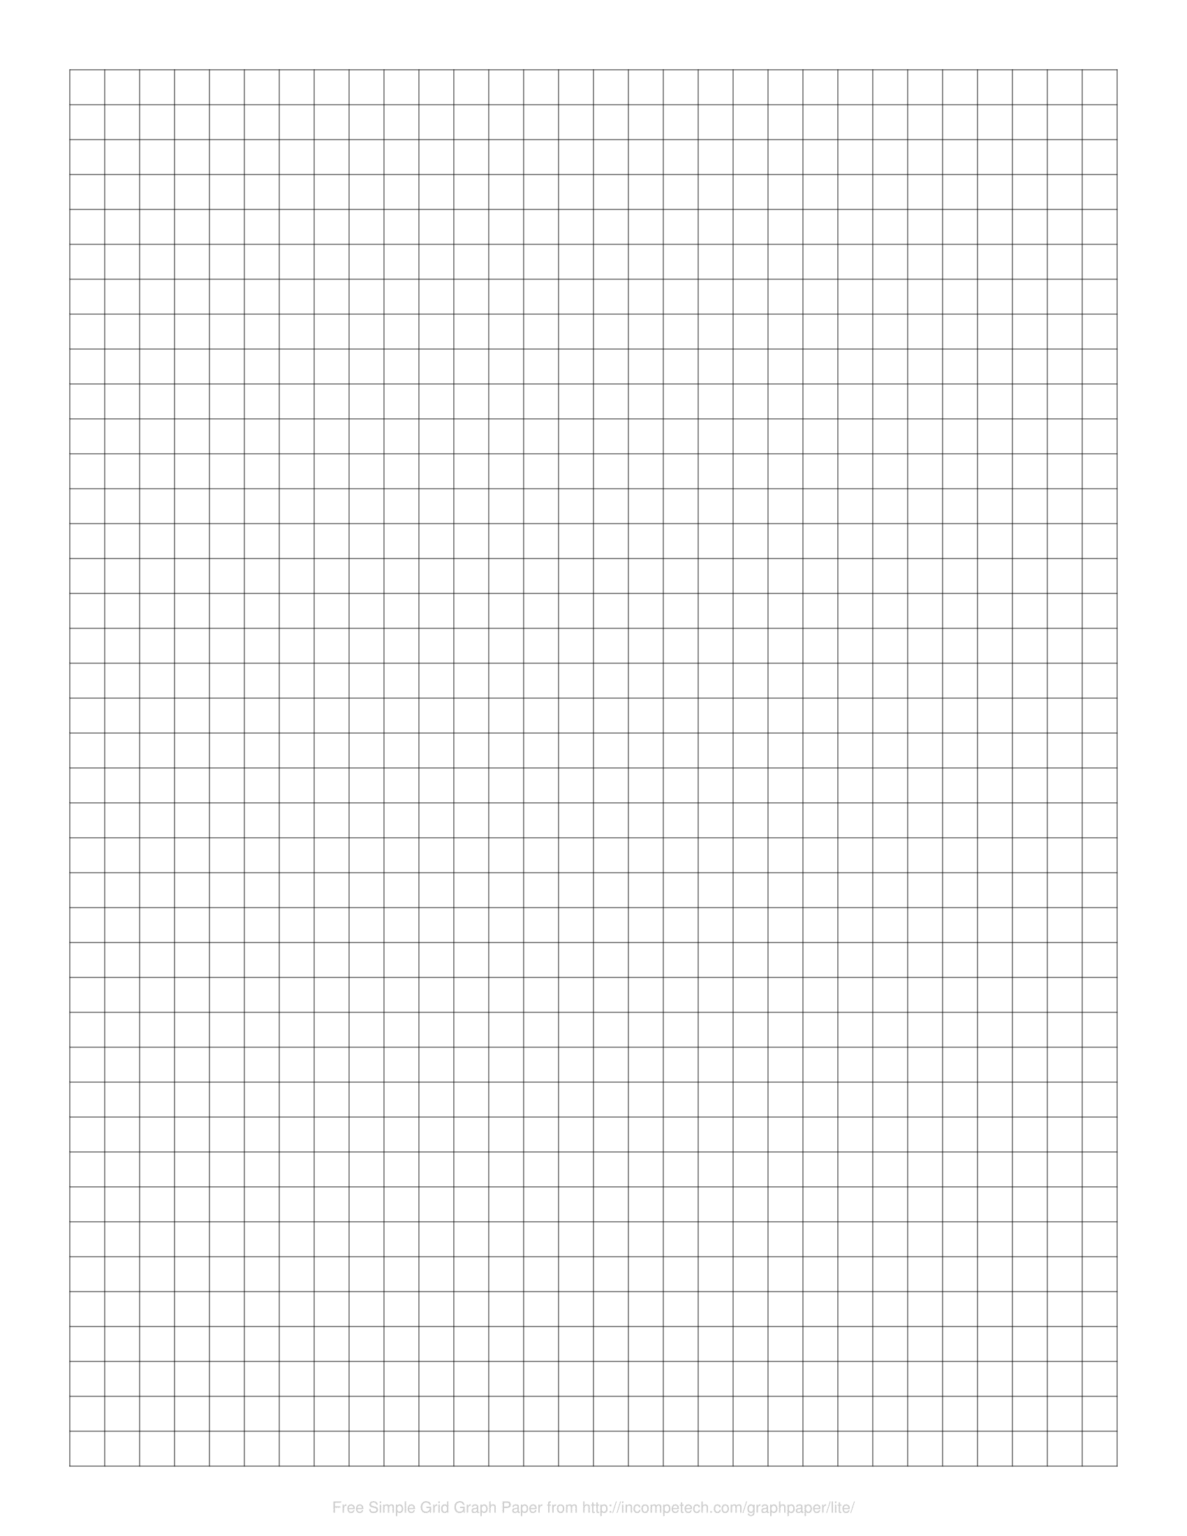 Interactive Online Graph Paper Oflu bntl With 1 Cm Graph Paper 